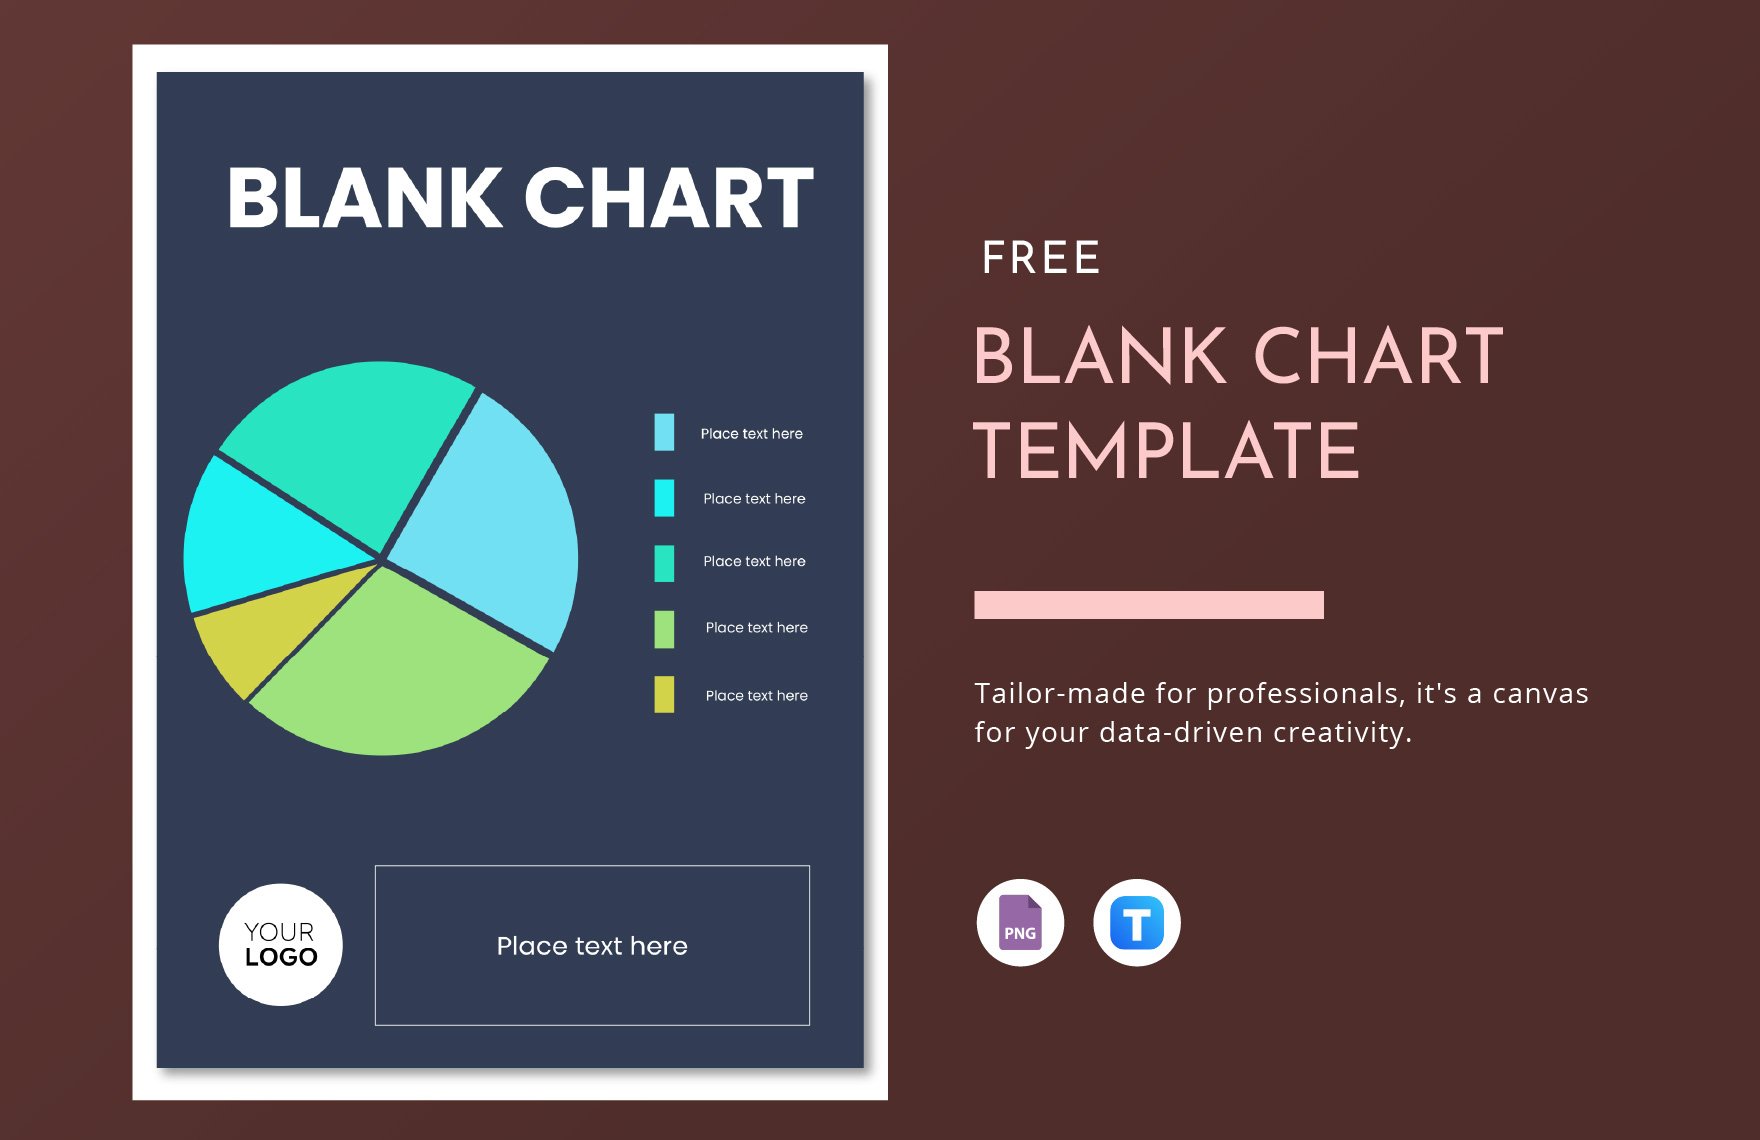 Blank Chart Template in PNG